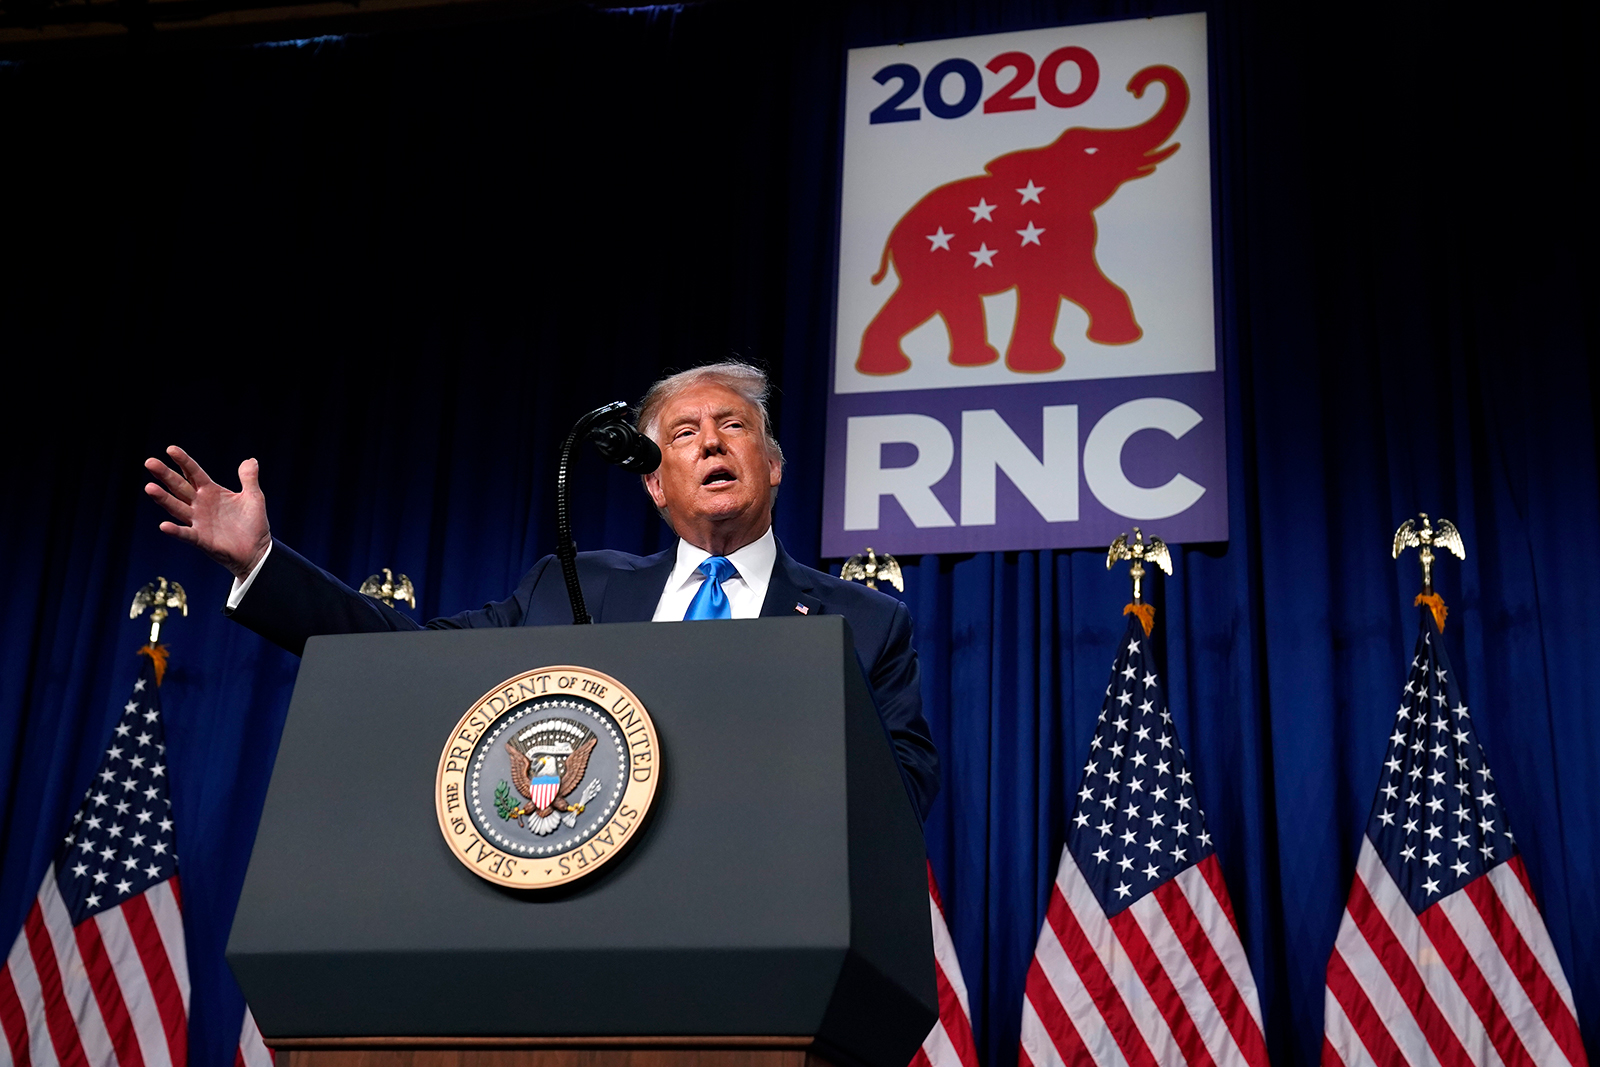 President Donald Trump speaks at the Republican National Committee convention site, on Monday, August 24, in Charlotte.